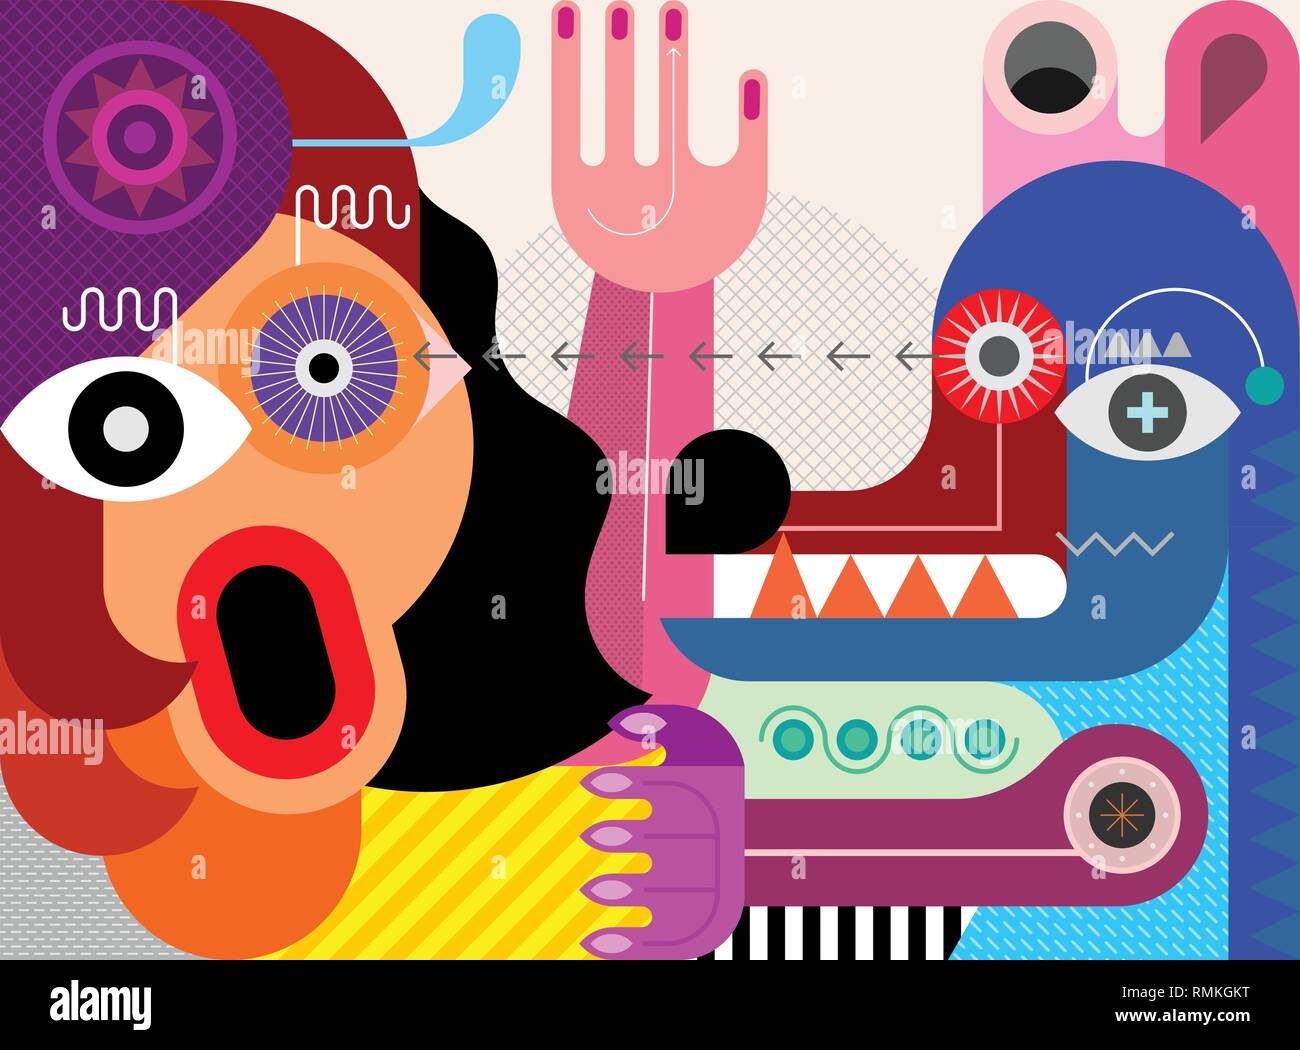 A woman is afraid of a big angry dog. Contemporary art vector illustration. The dog attacked the woman. The woman is screaming. Stock Vector